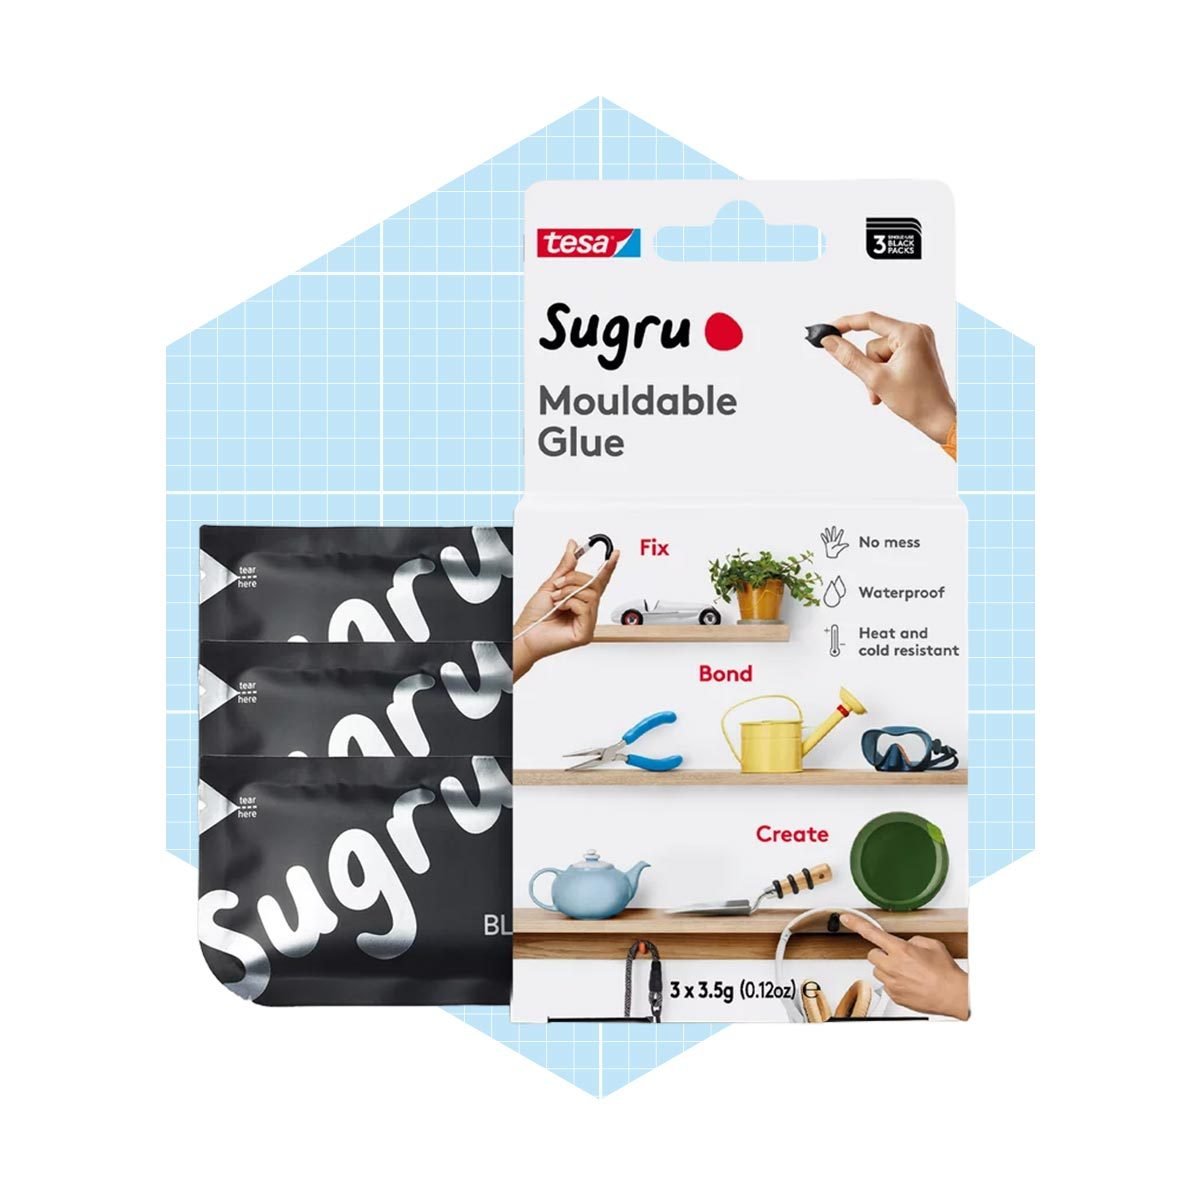 Valuable Content Award for Sugru - Valuable Content